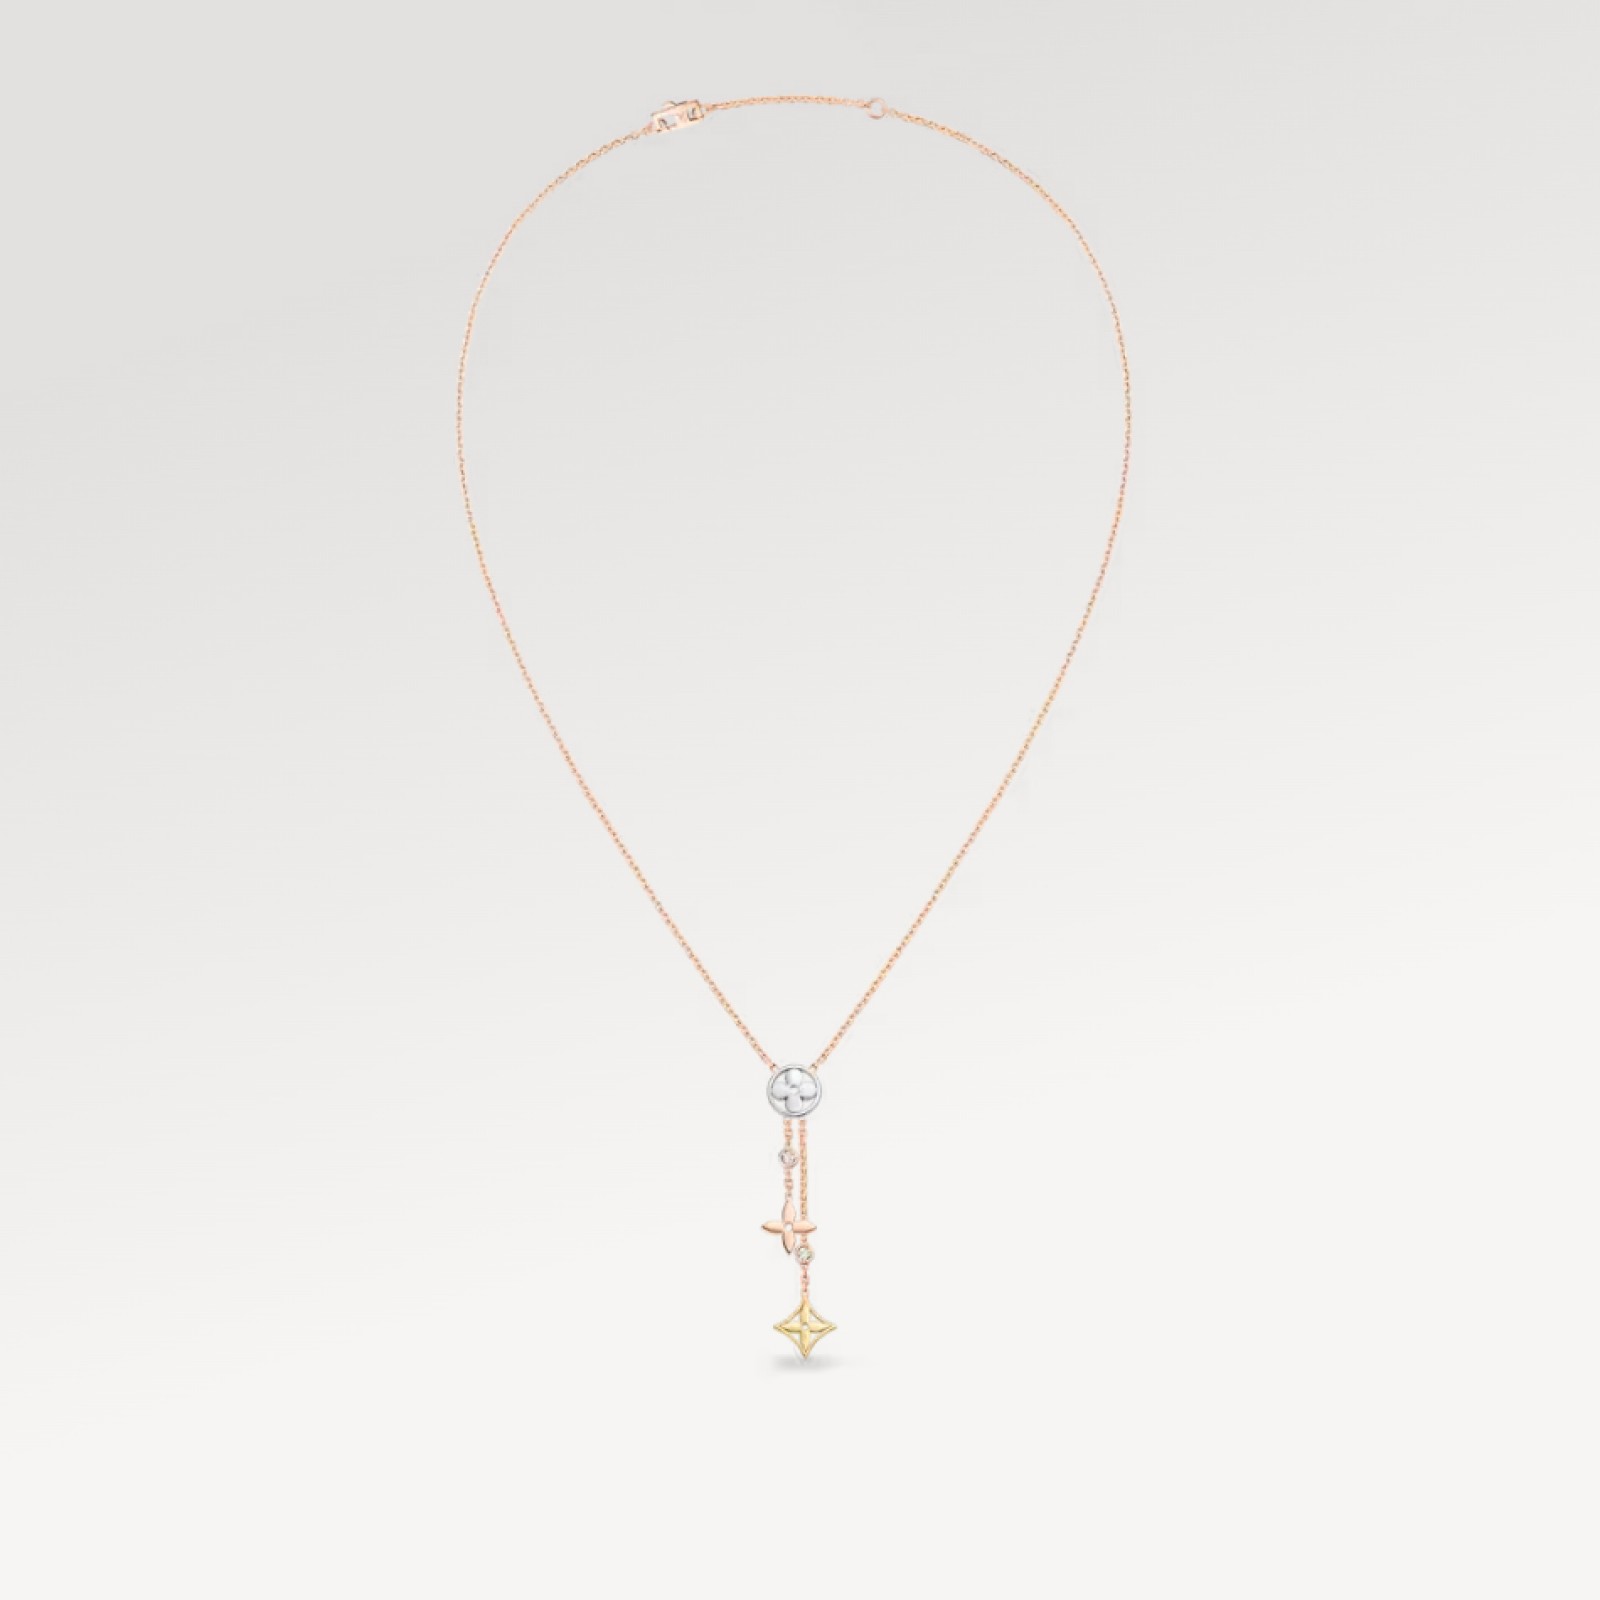 IDYLLE BLOSSOM Y PENDANT, 3 GOLDS AND DIAMONDS